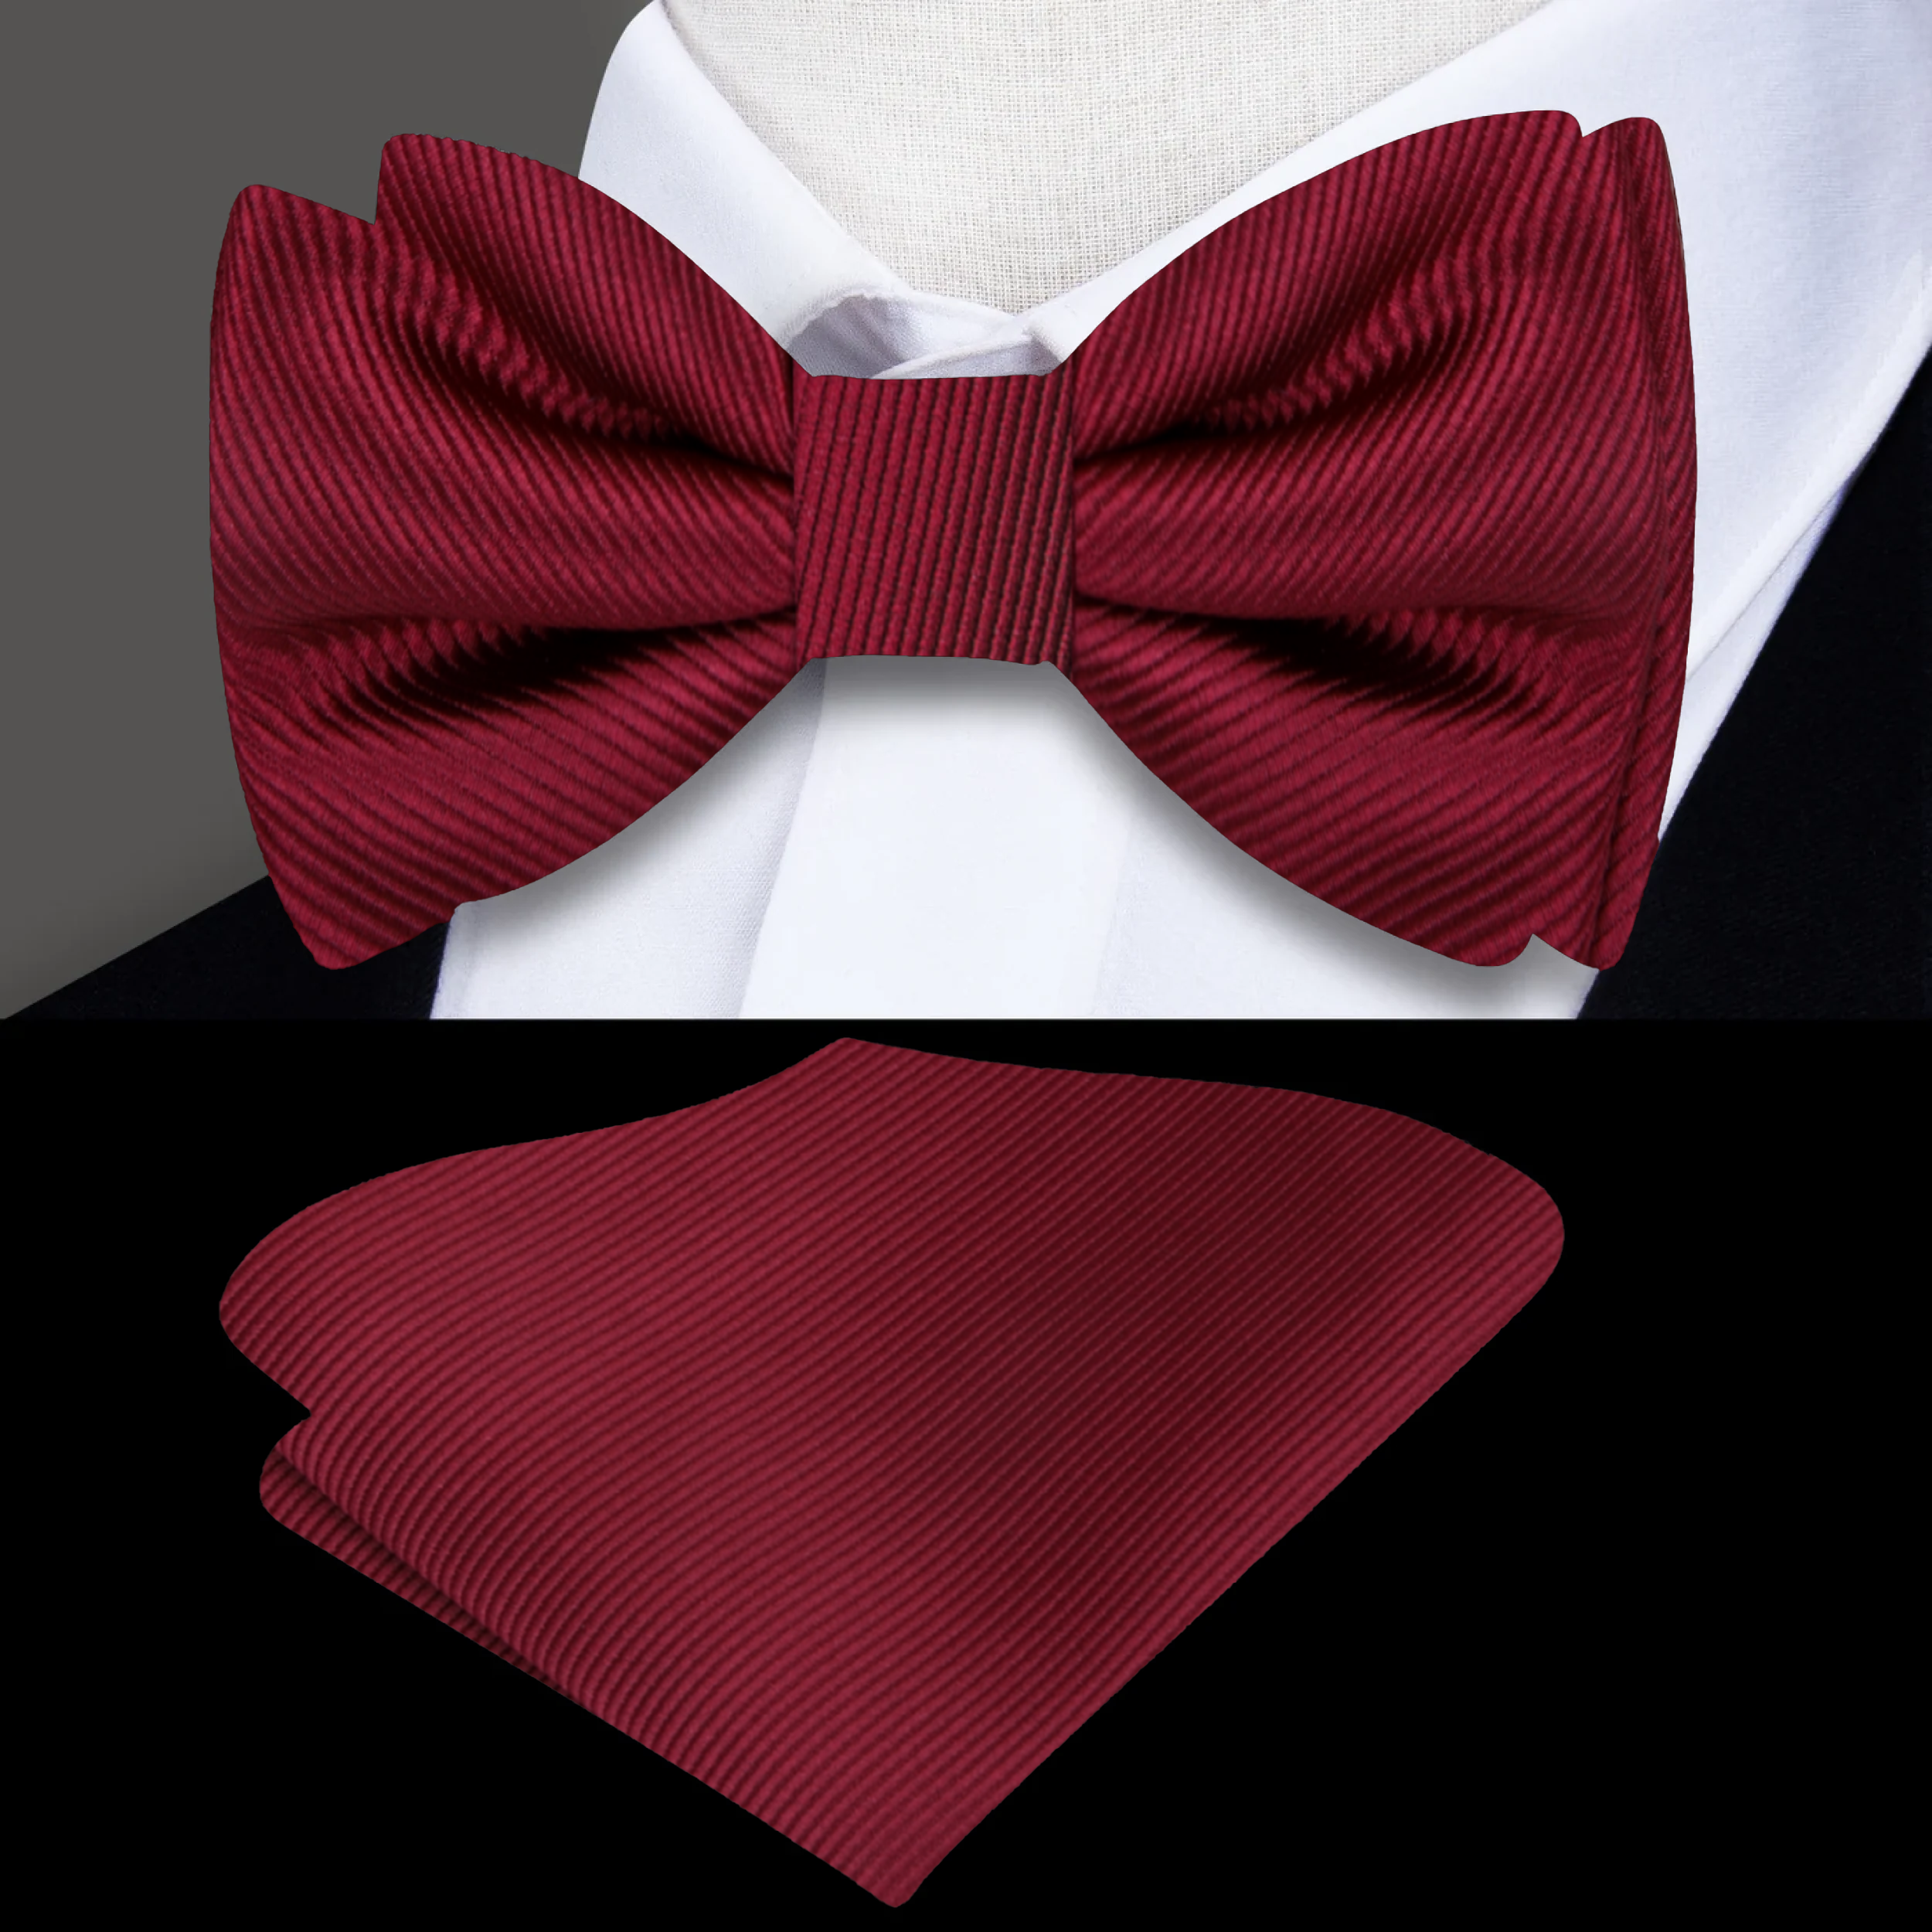 Solid Burgundy Red Bow Tie